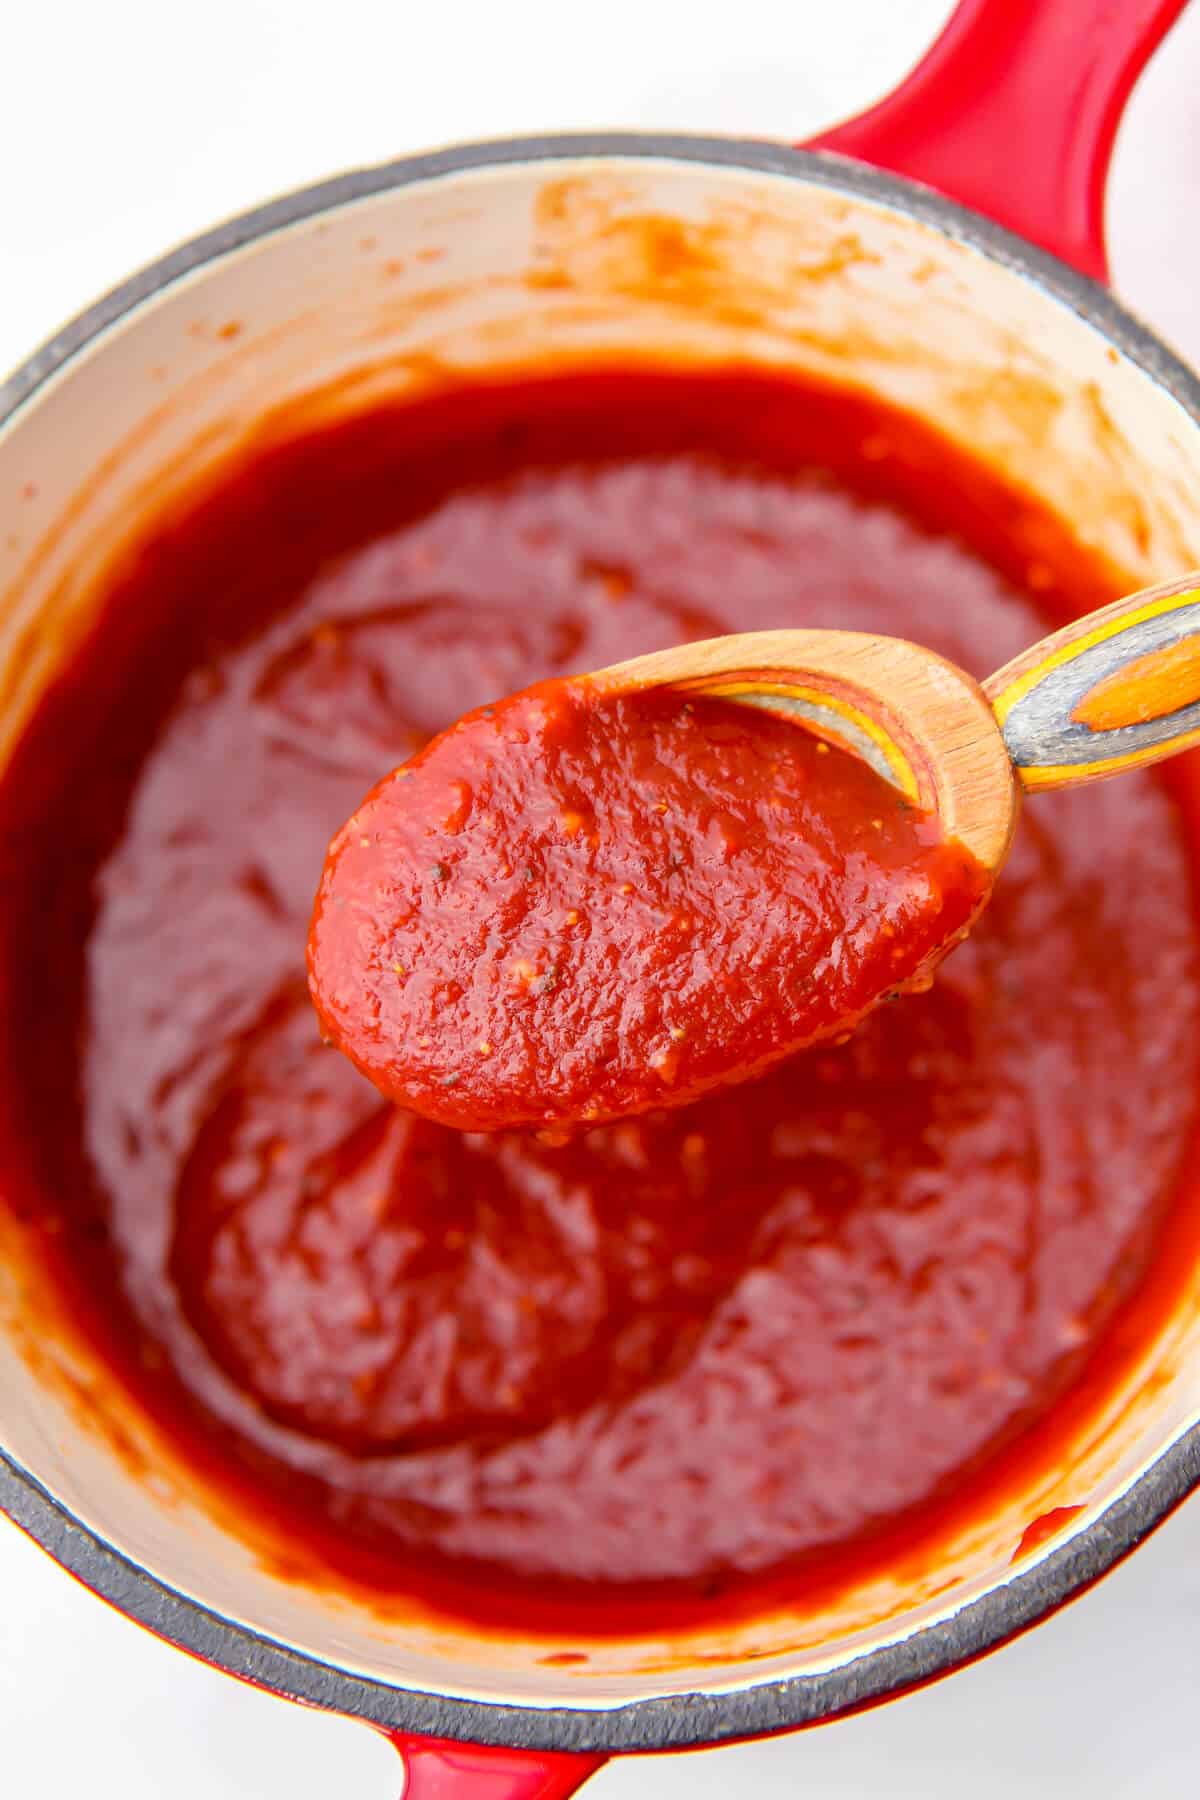 Vegan barbeque sauce being scooped up with a wooden spoon over a red saucepan.